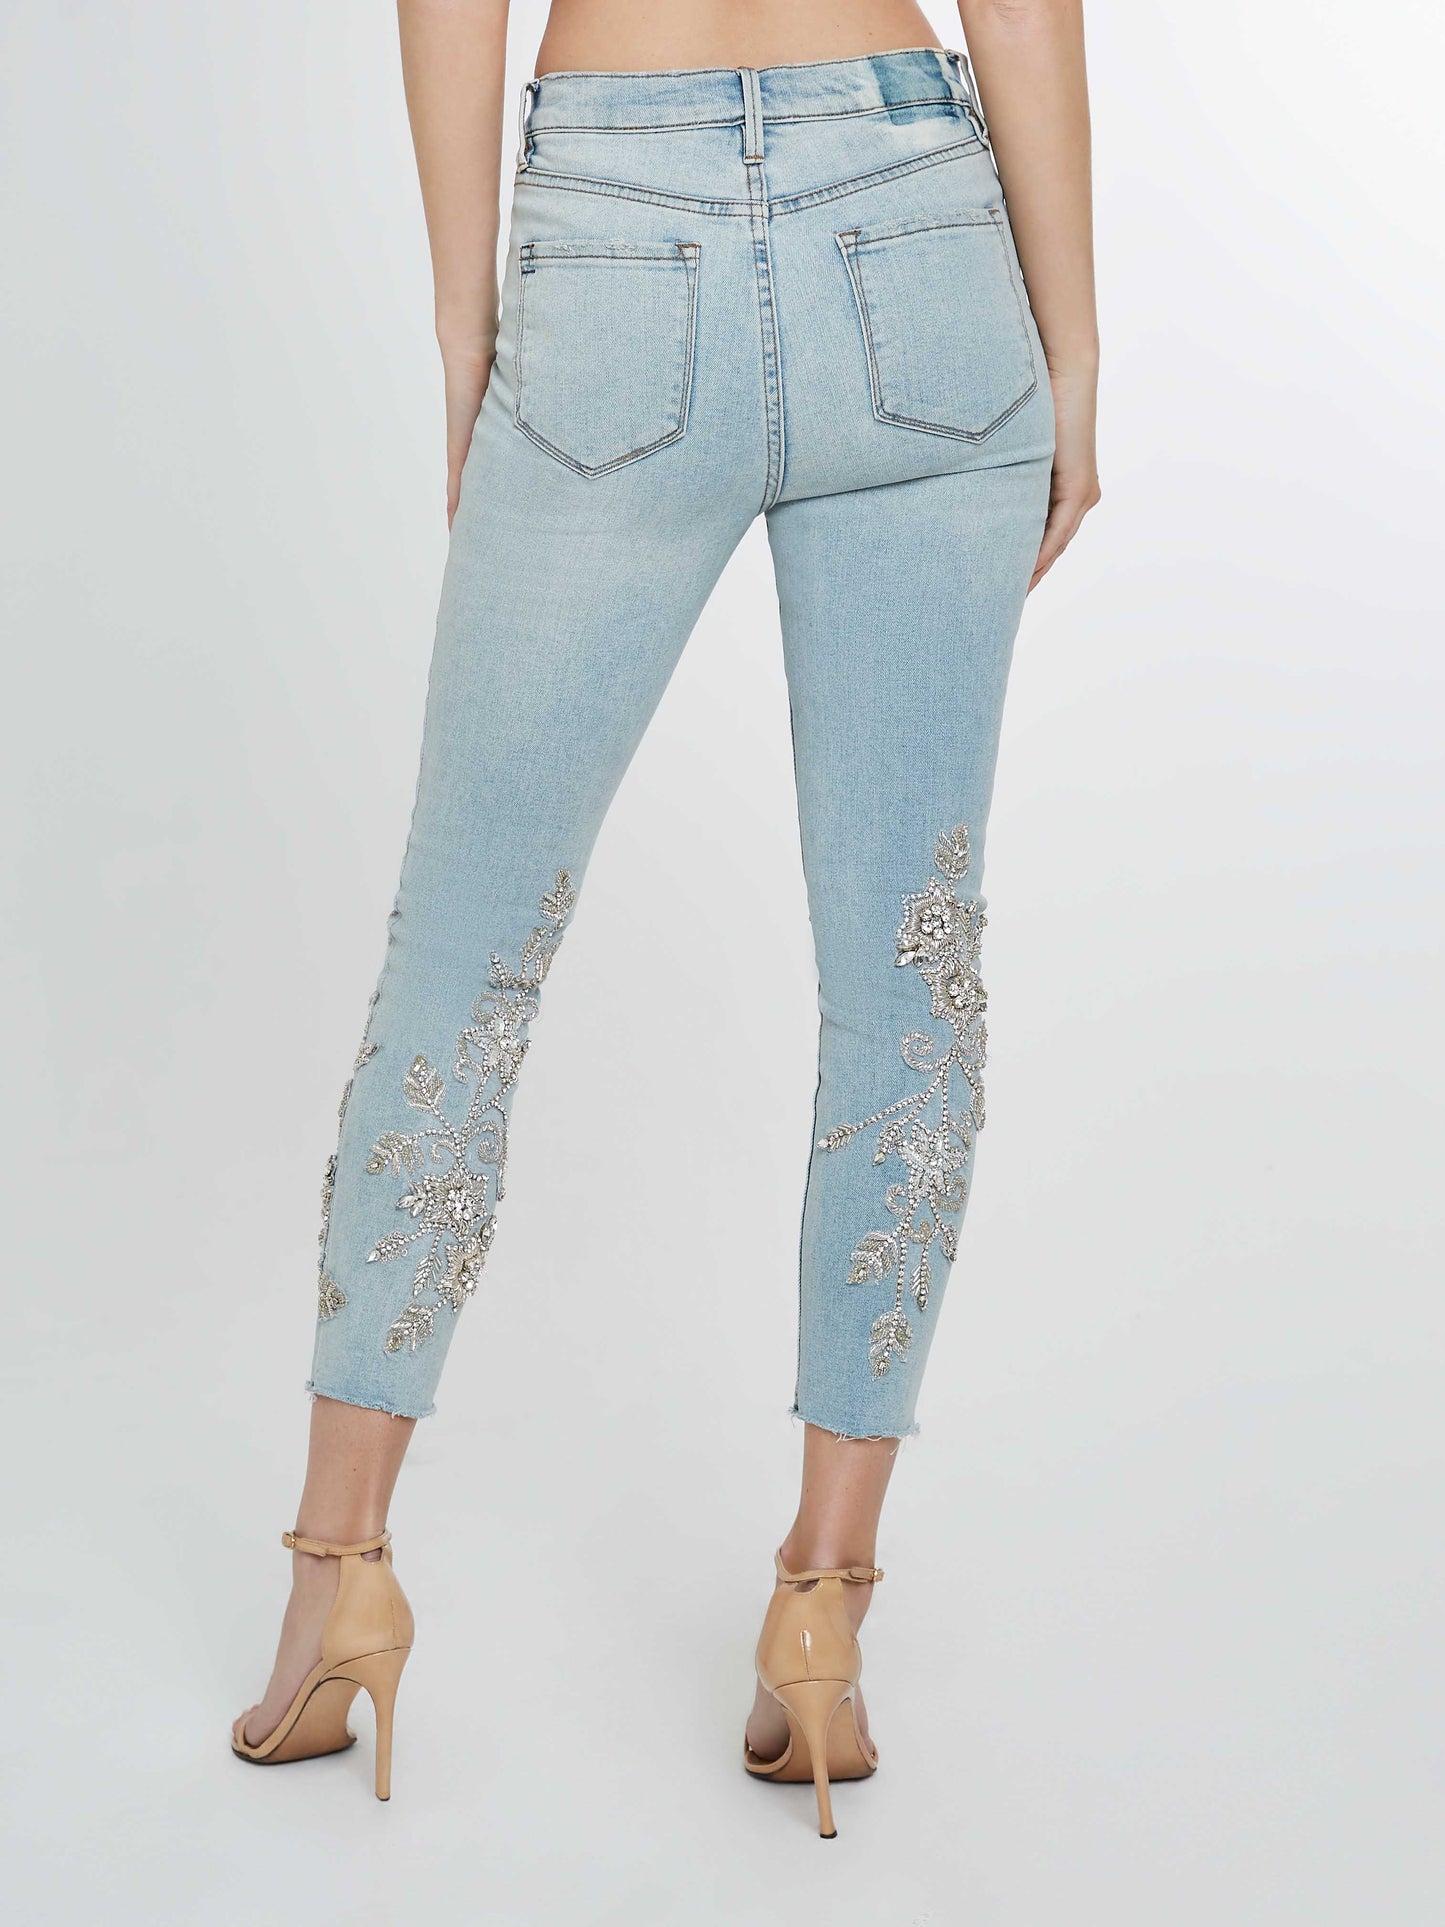 Jeans with crystal flower embroidery